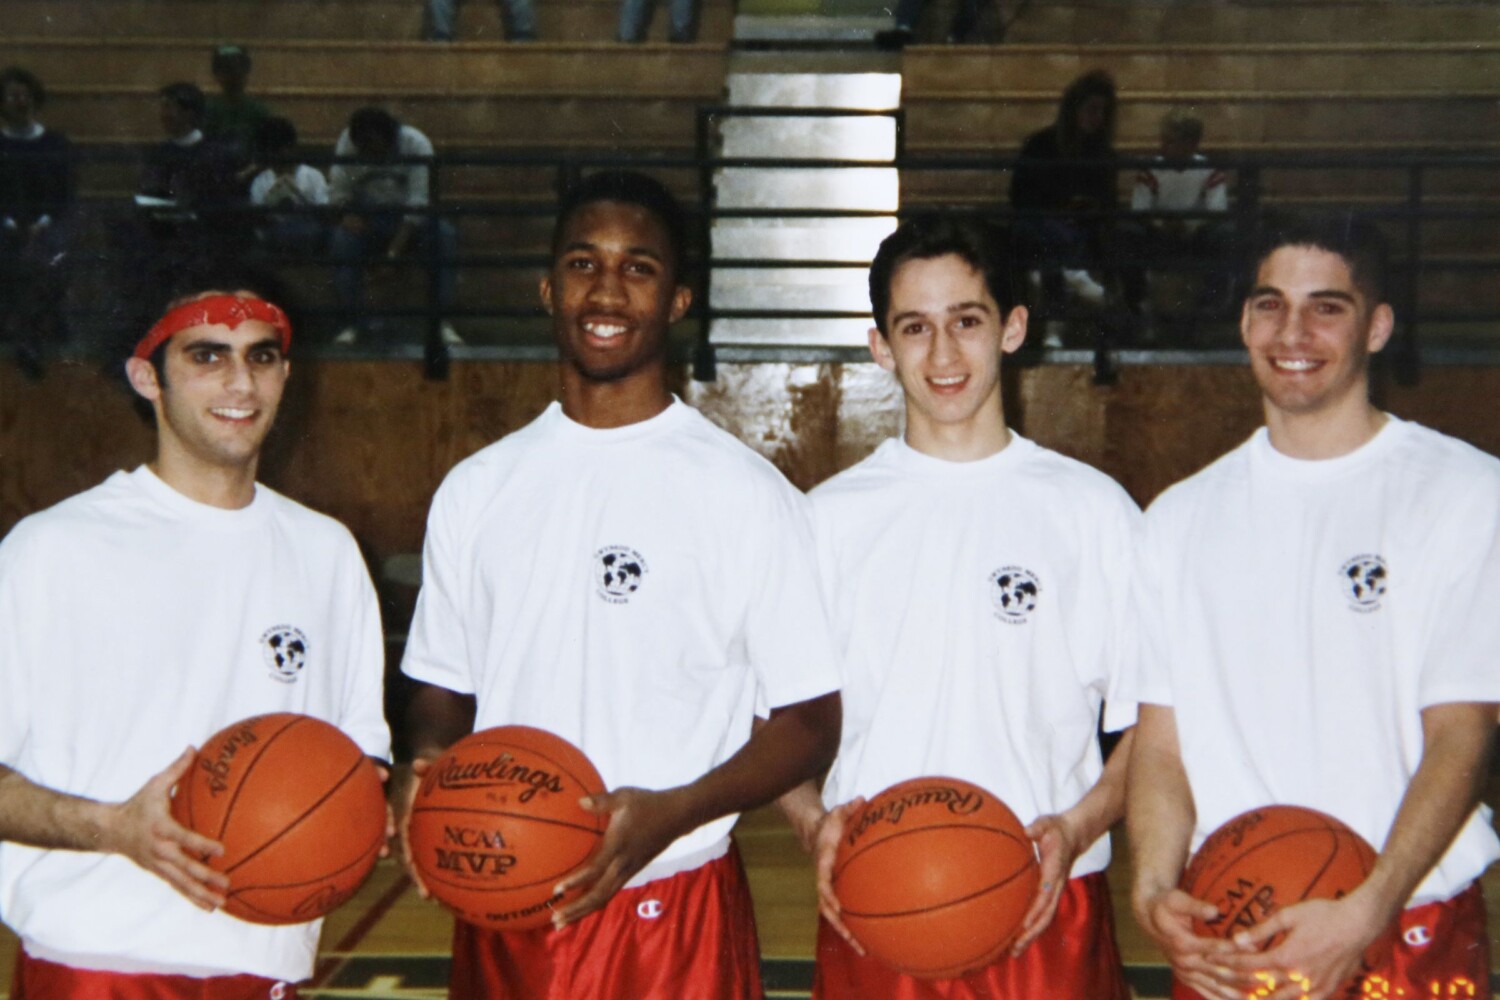 Kobe Bryant images that you've never seen from his high school days